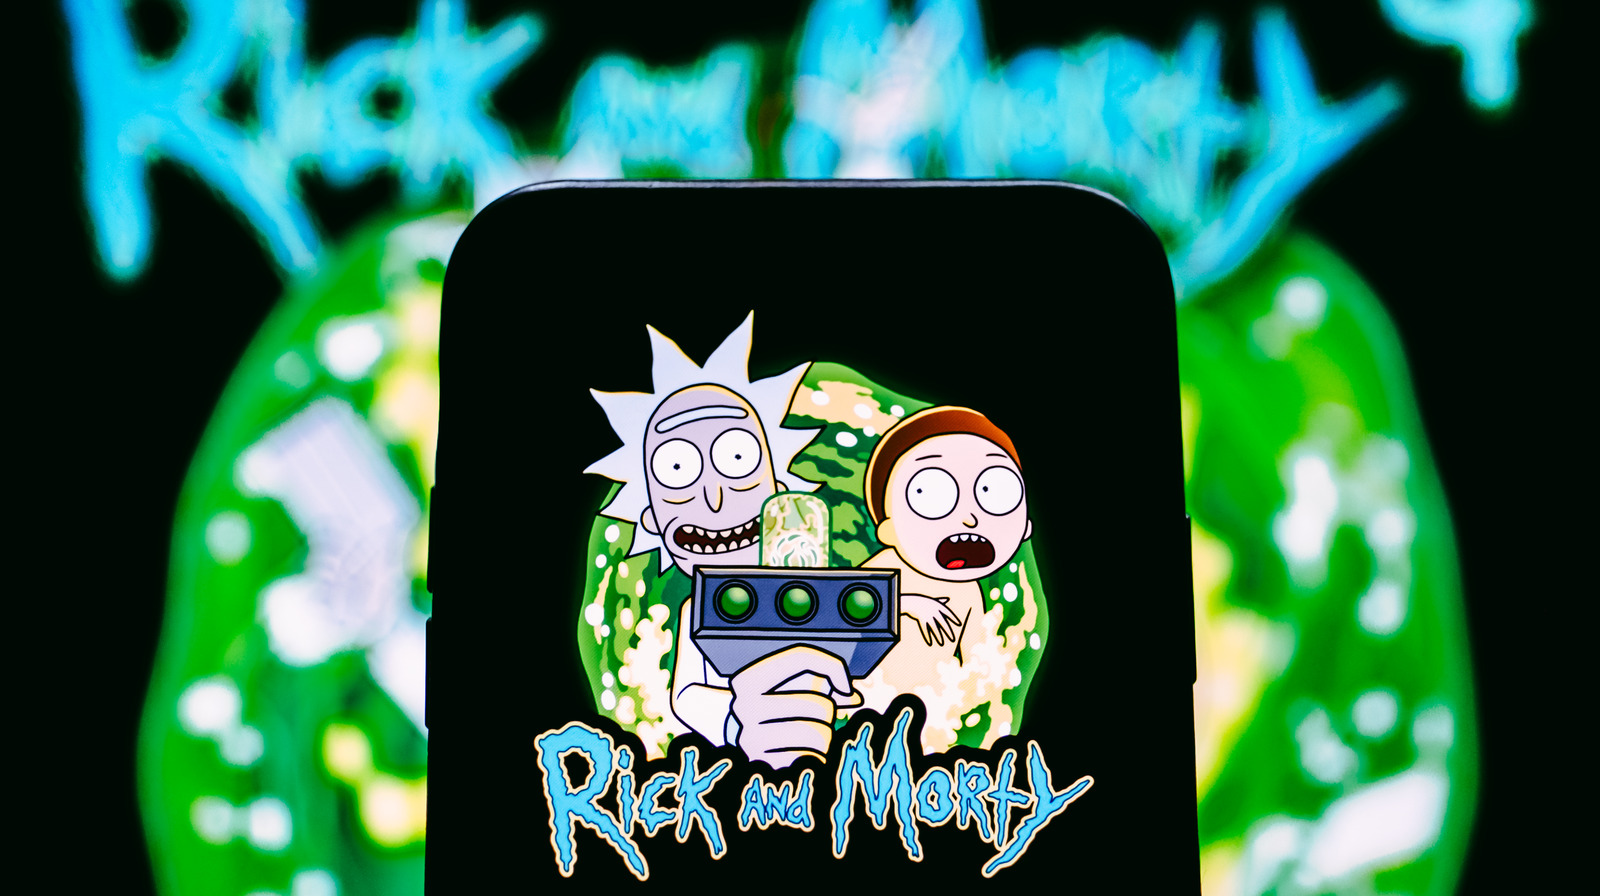 Rick and Morty Gods Dimension HD wallpaper download